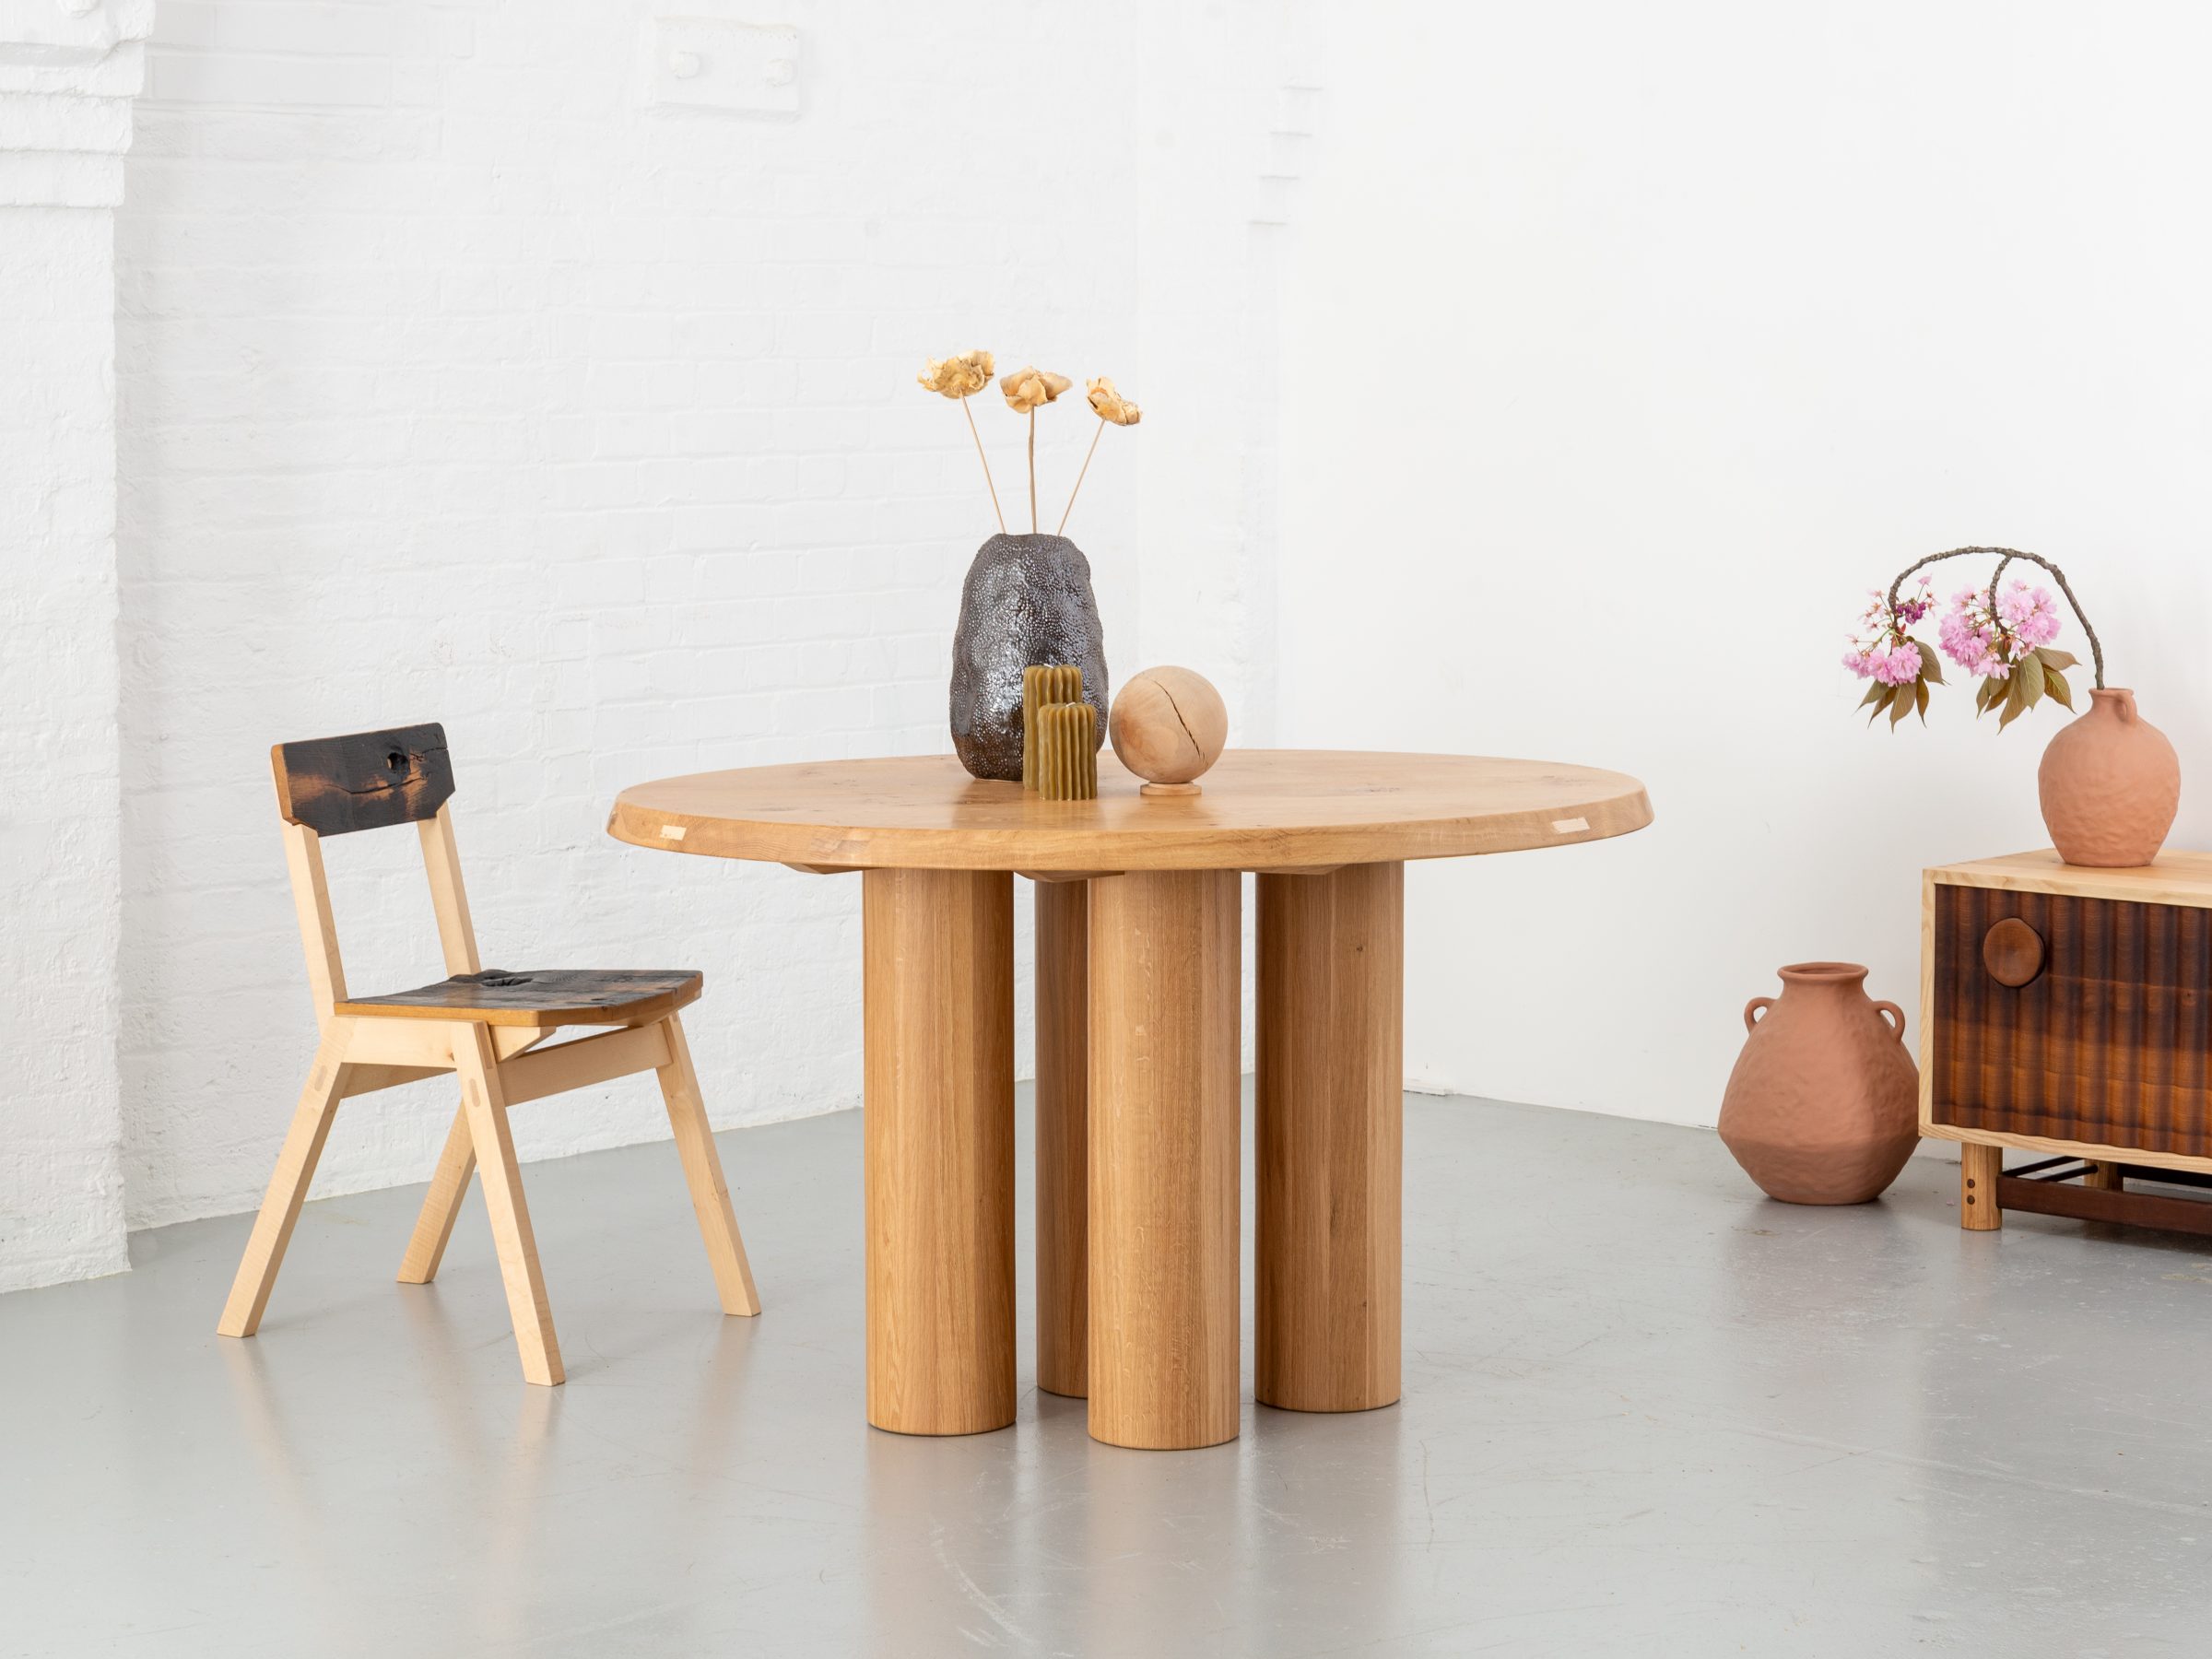 Pier Oval dining table made with a pippy oak table top and stave oak legs, seats 4 people